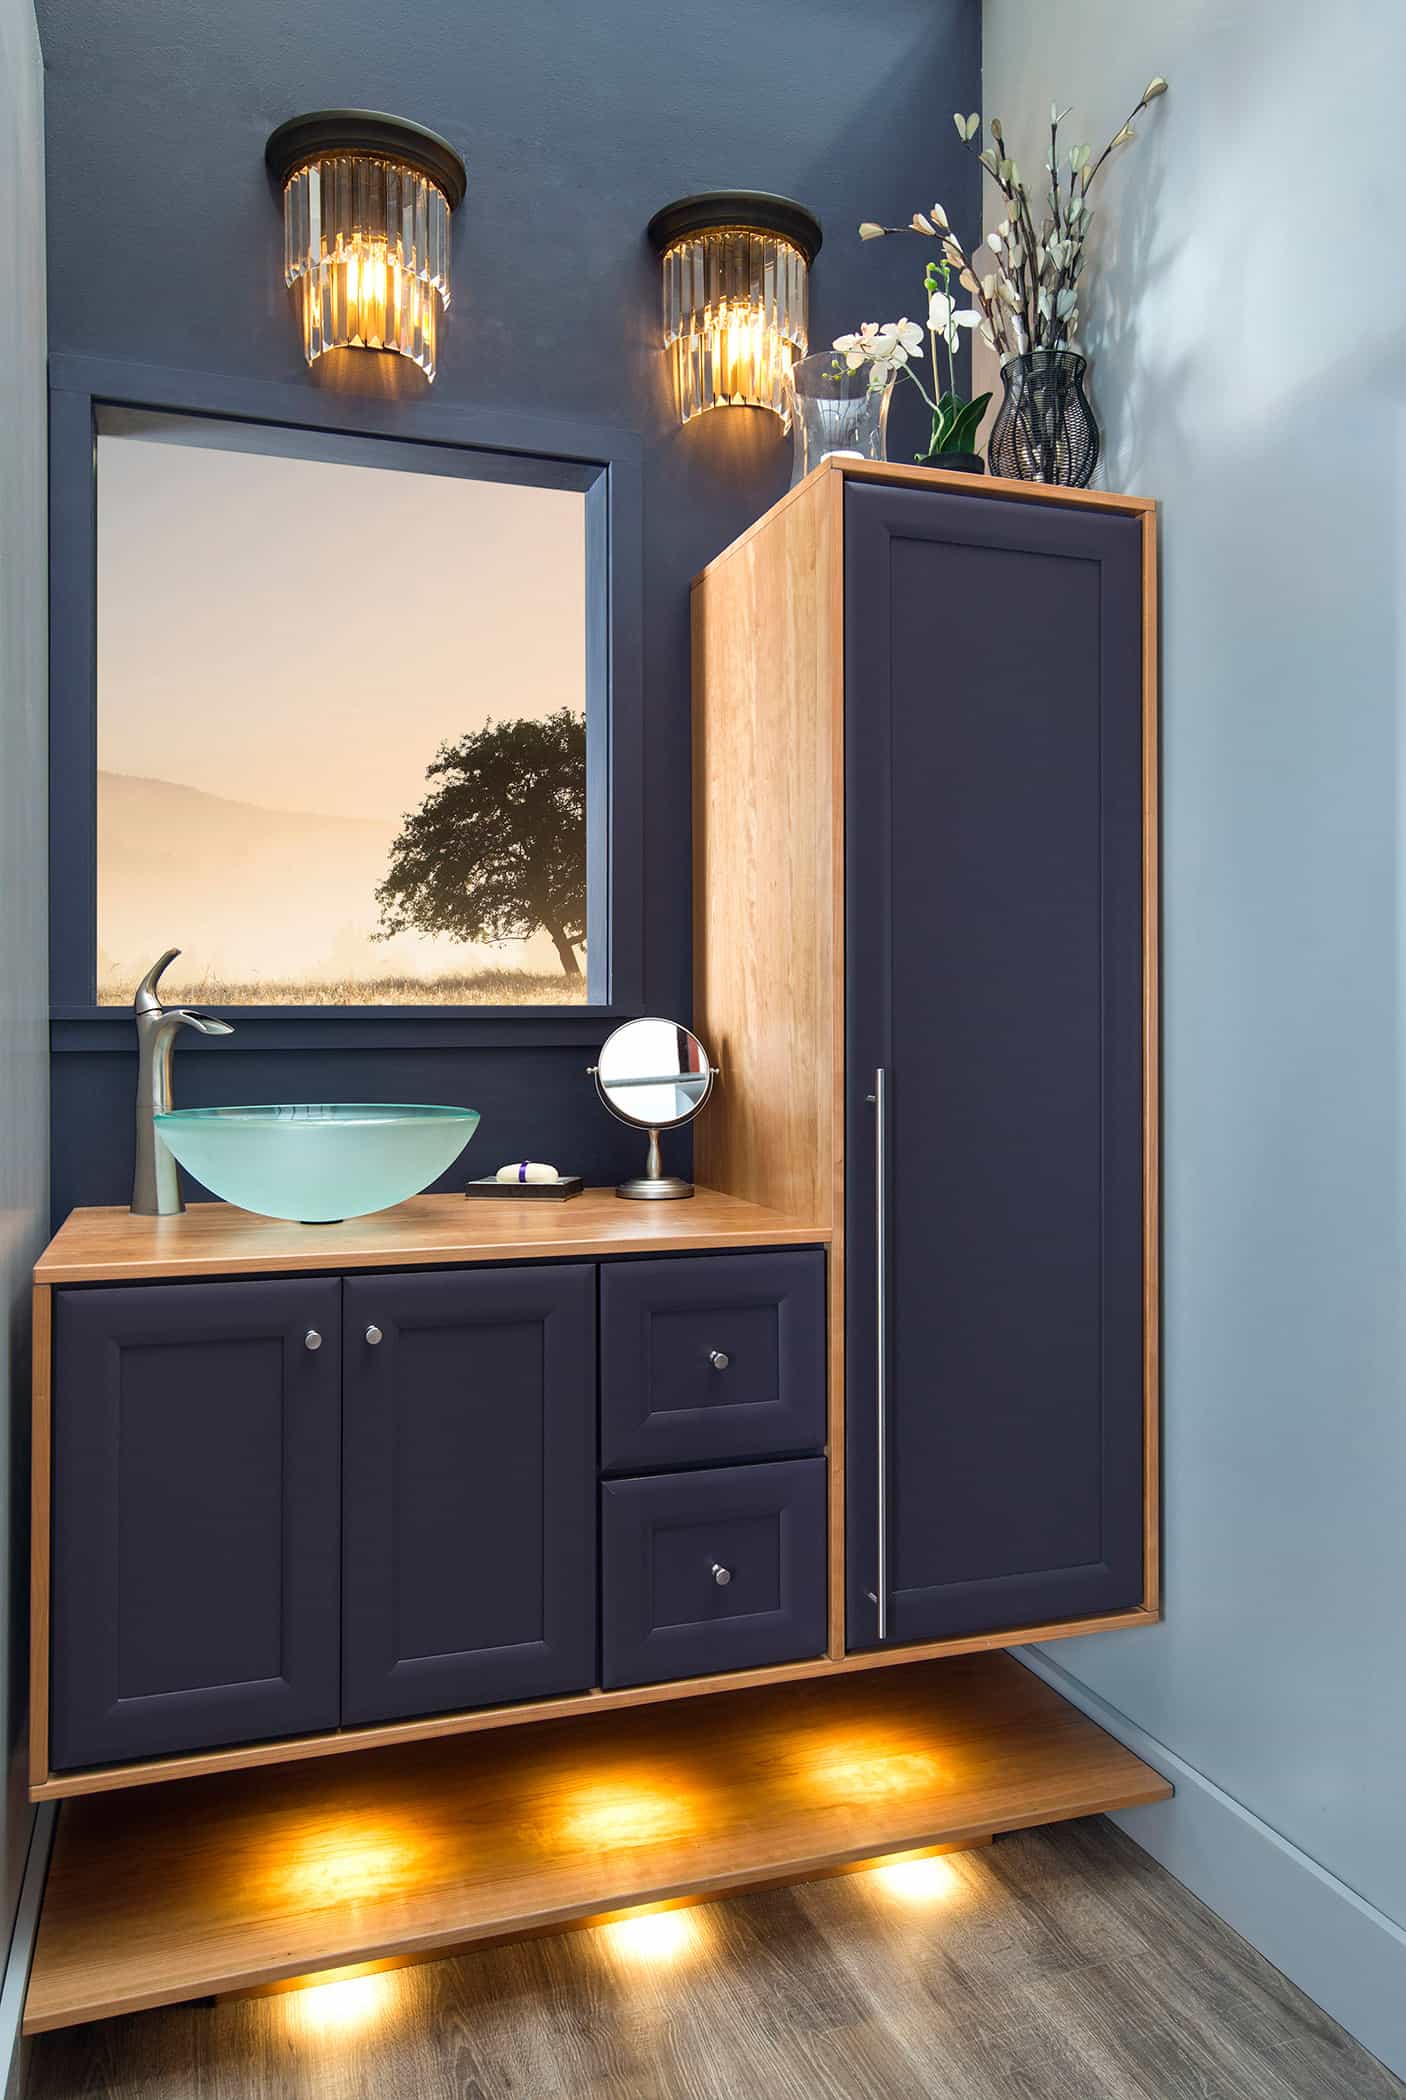 Unique Suspended Bathroom Vanity for Small Space